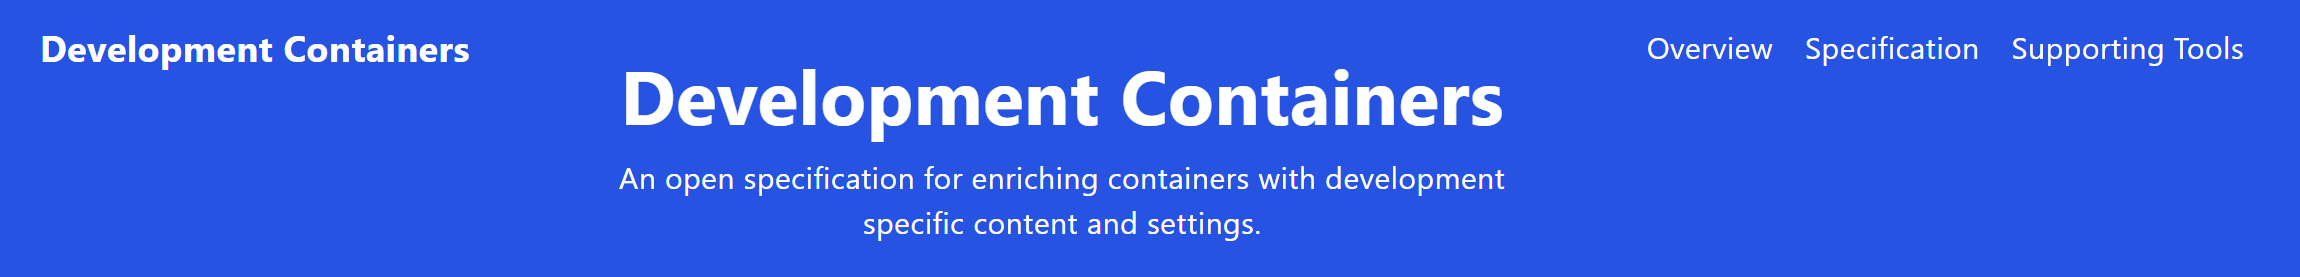 Banner from the Development Containers Specification website